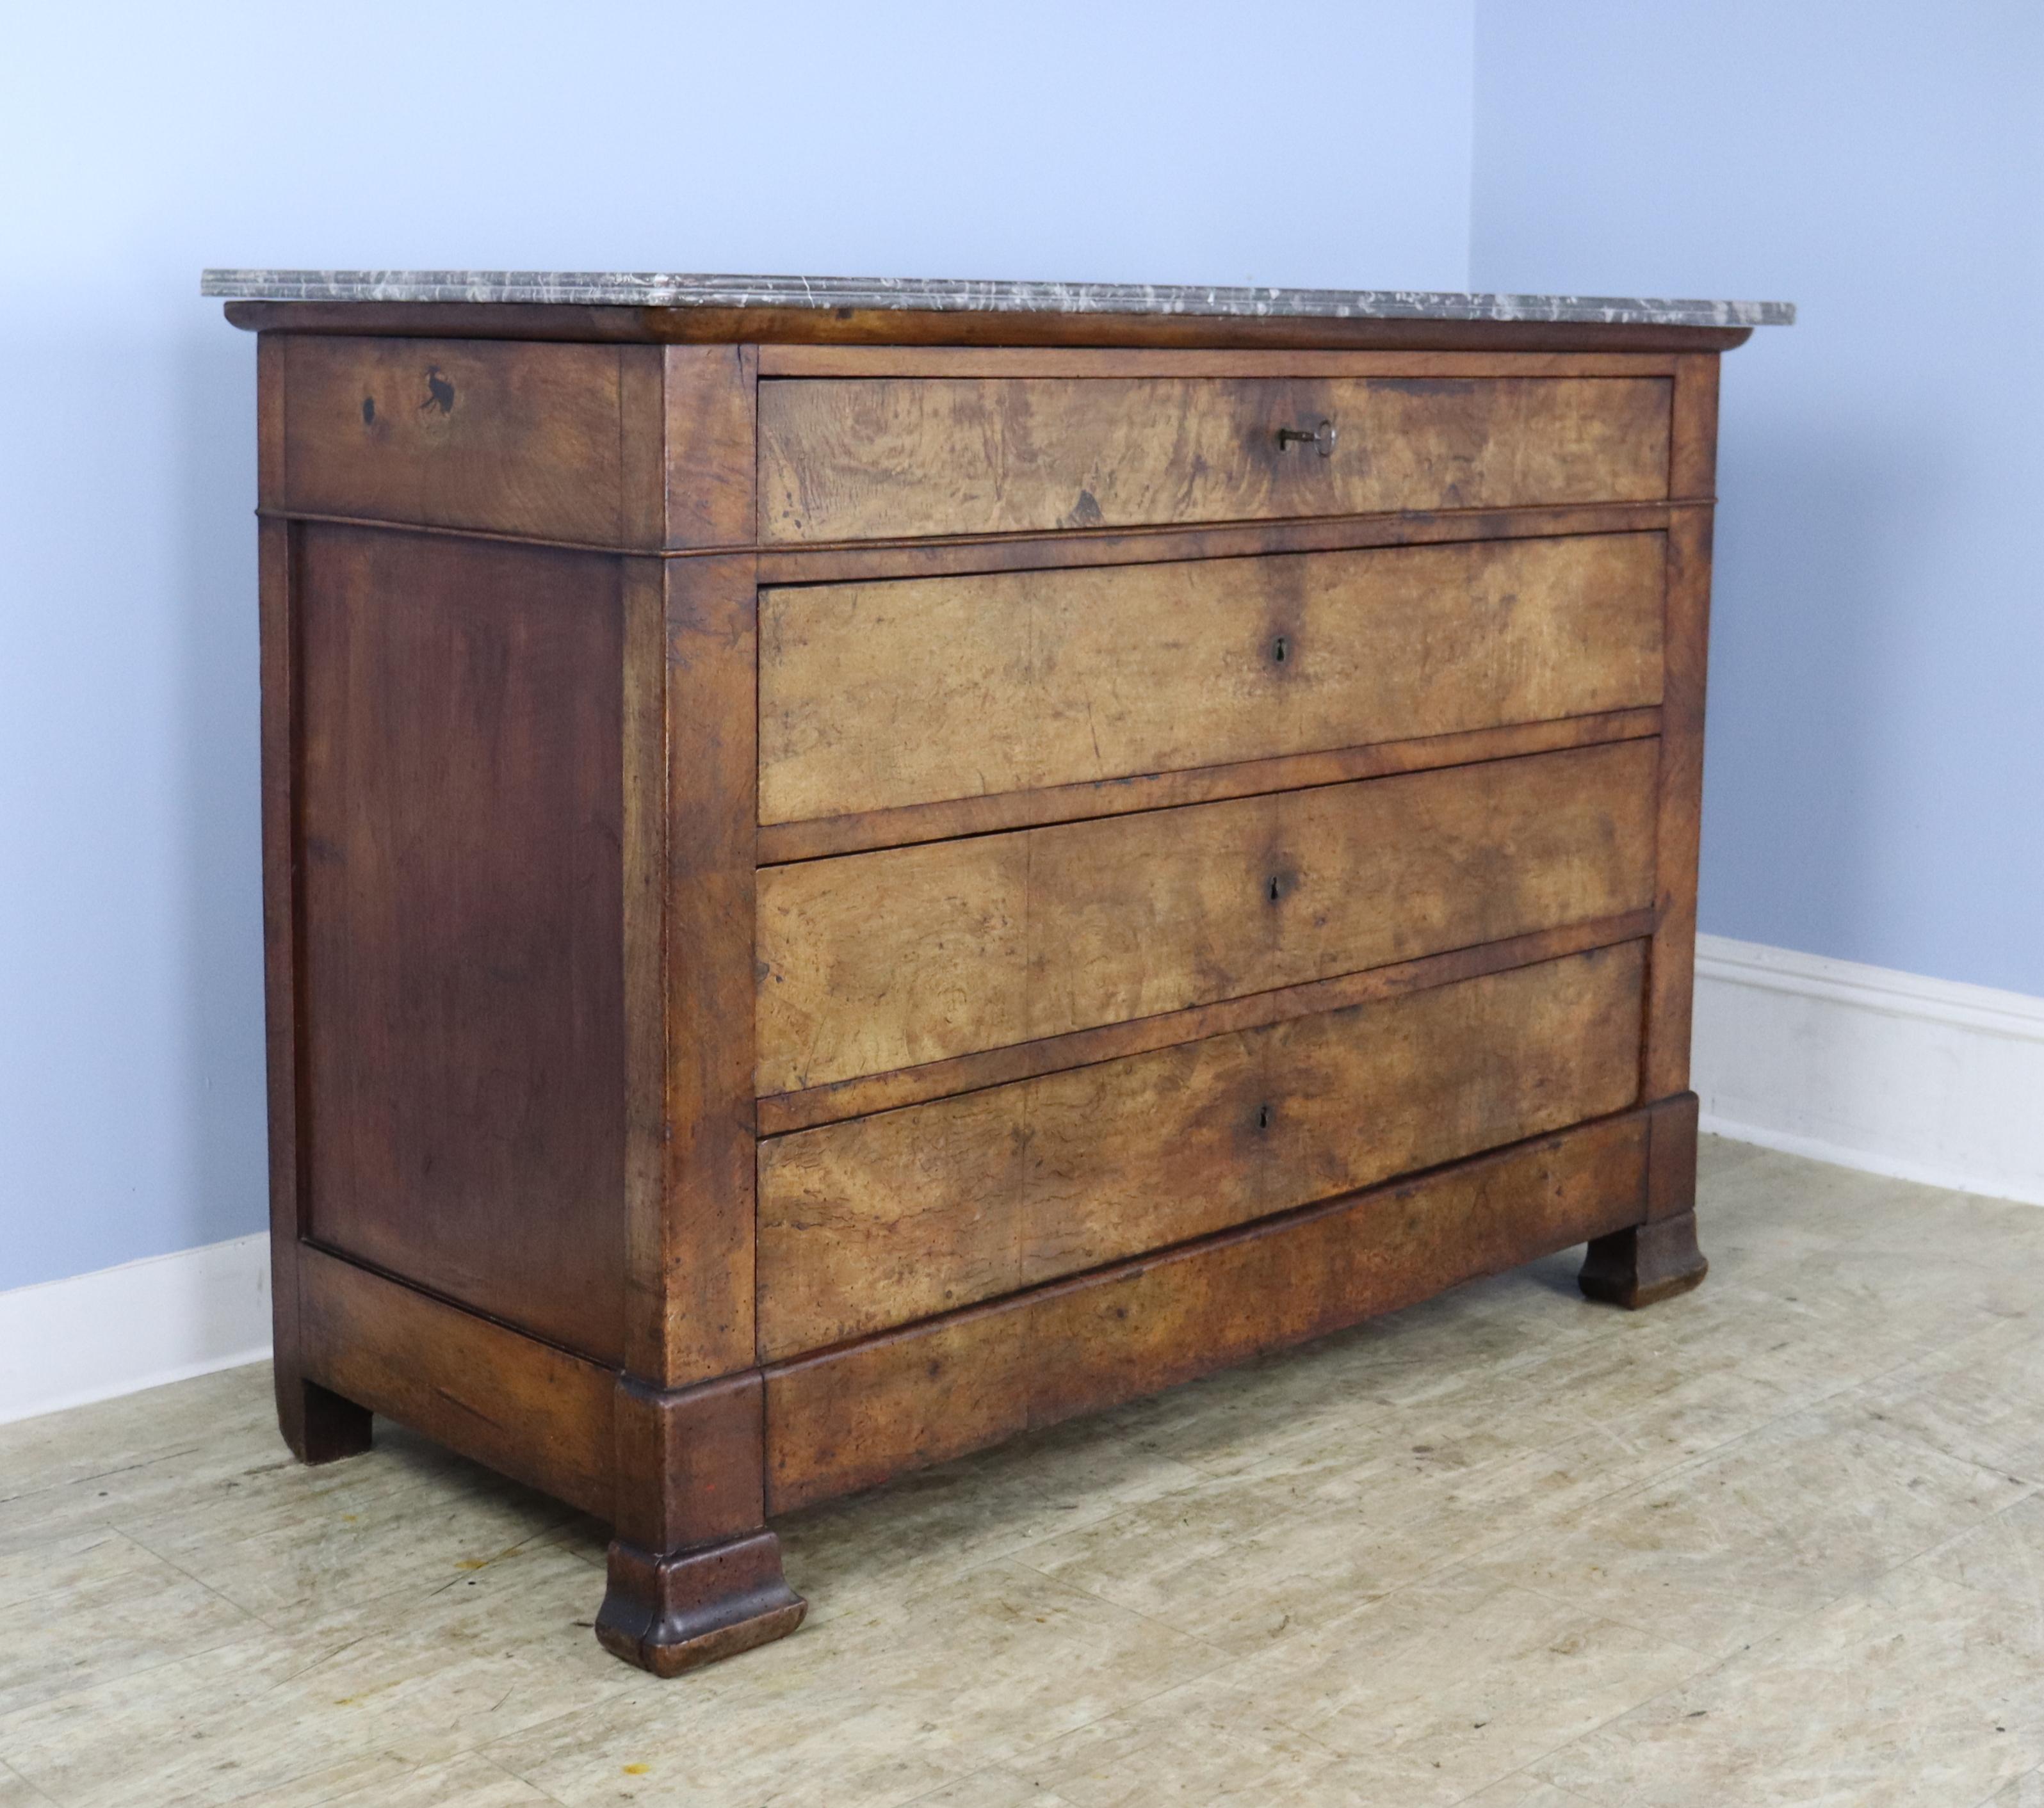 A classic Louis Philippe commode in dramtically grained walnut.  Four wide drawers which all open with the same key are quite clean inside and slide easily.  The walnut has very good color and patina,  with some fading in areas.  Marble is in nice